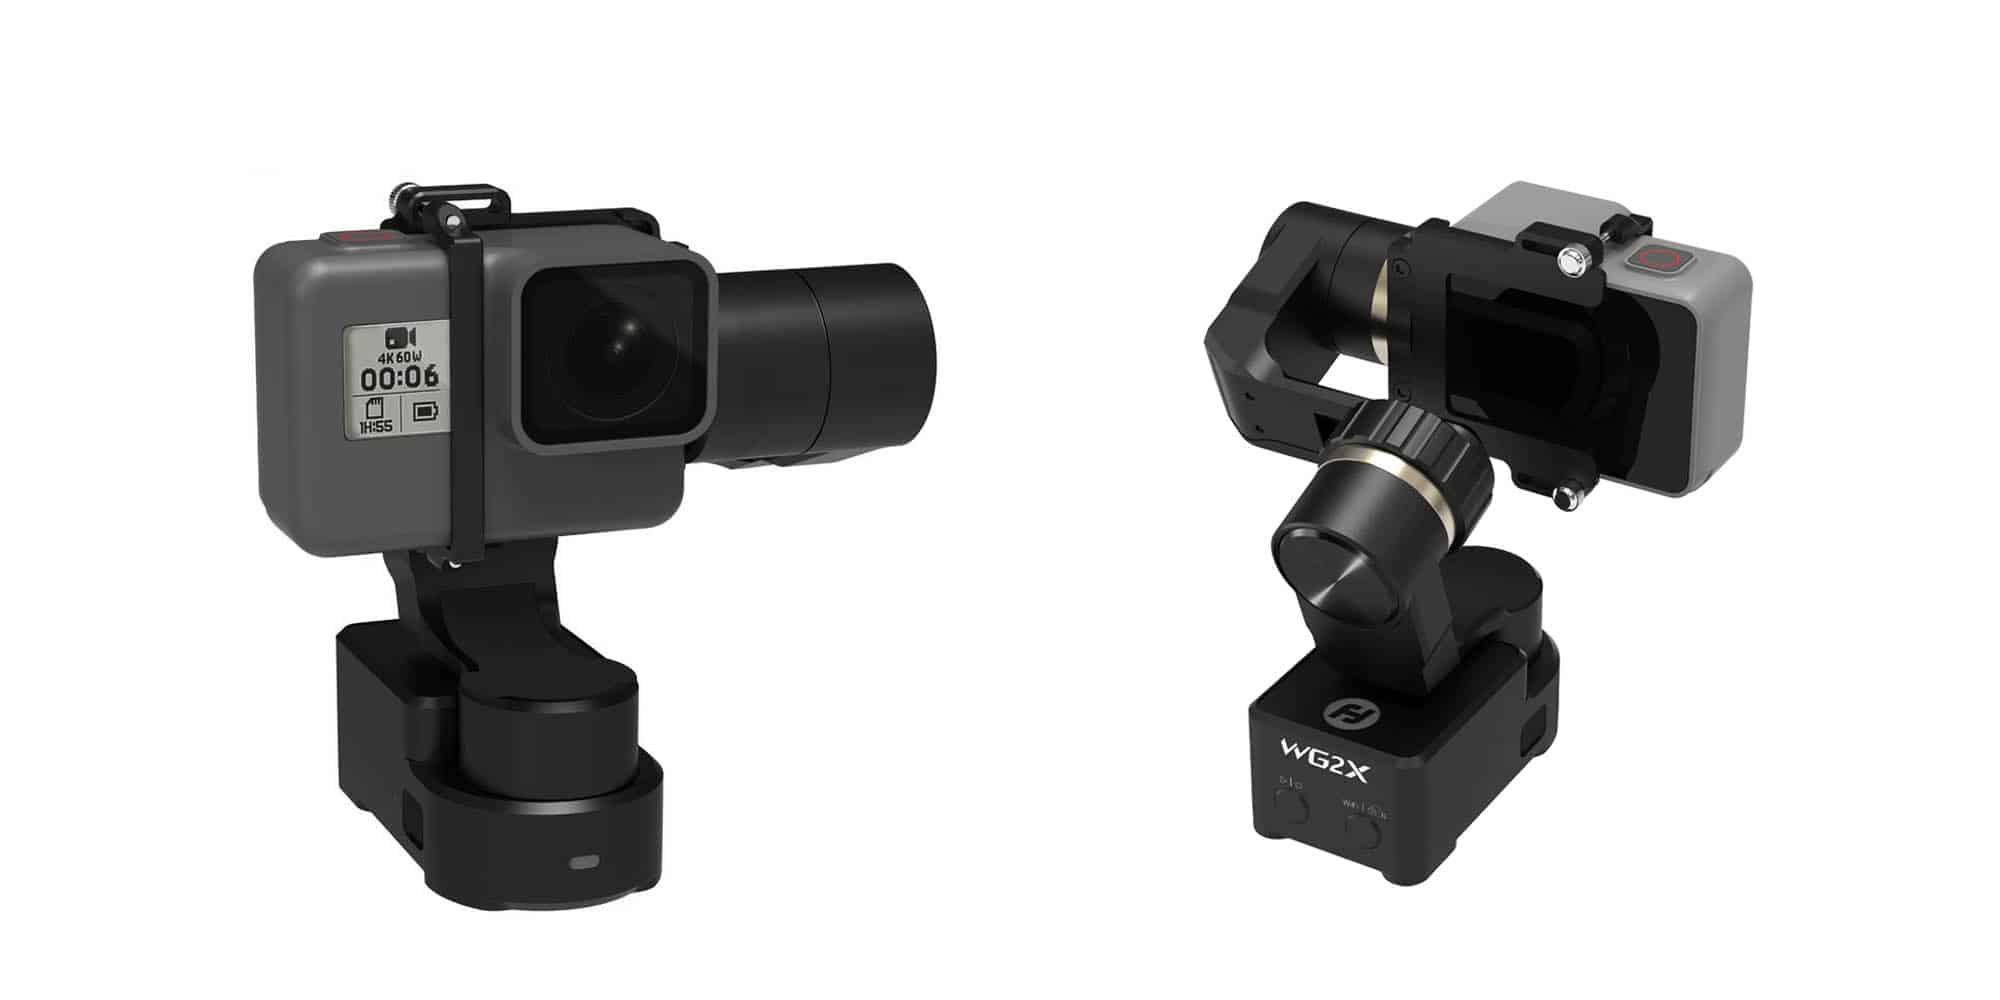 featured image for feiyu wg2x gopro gimbal review